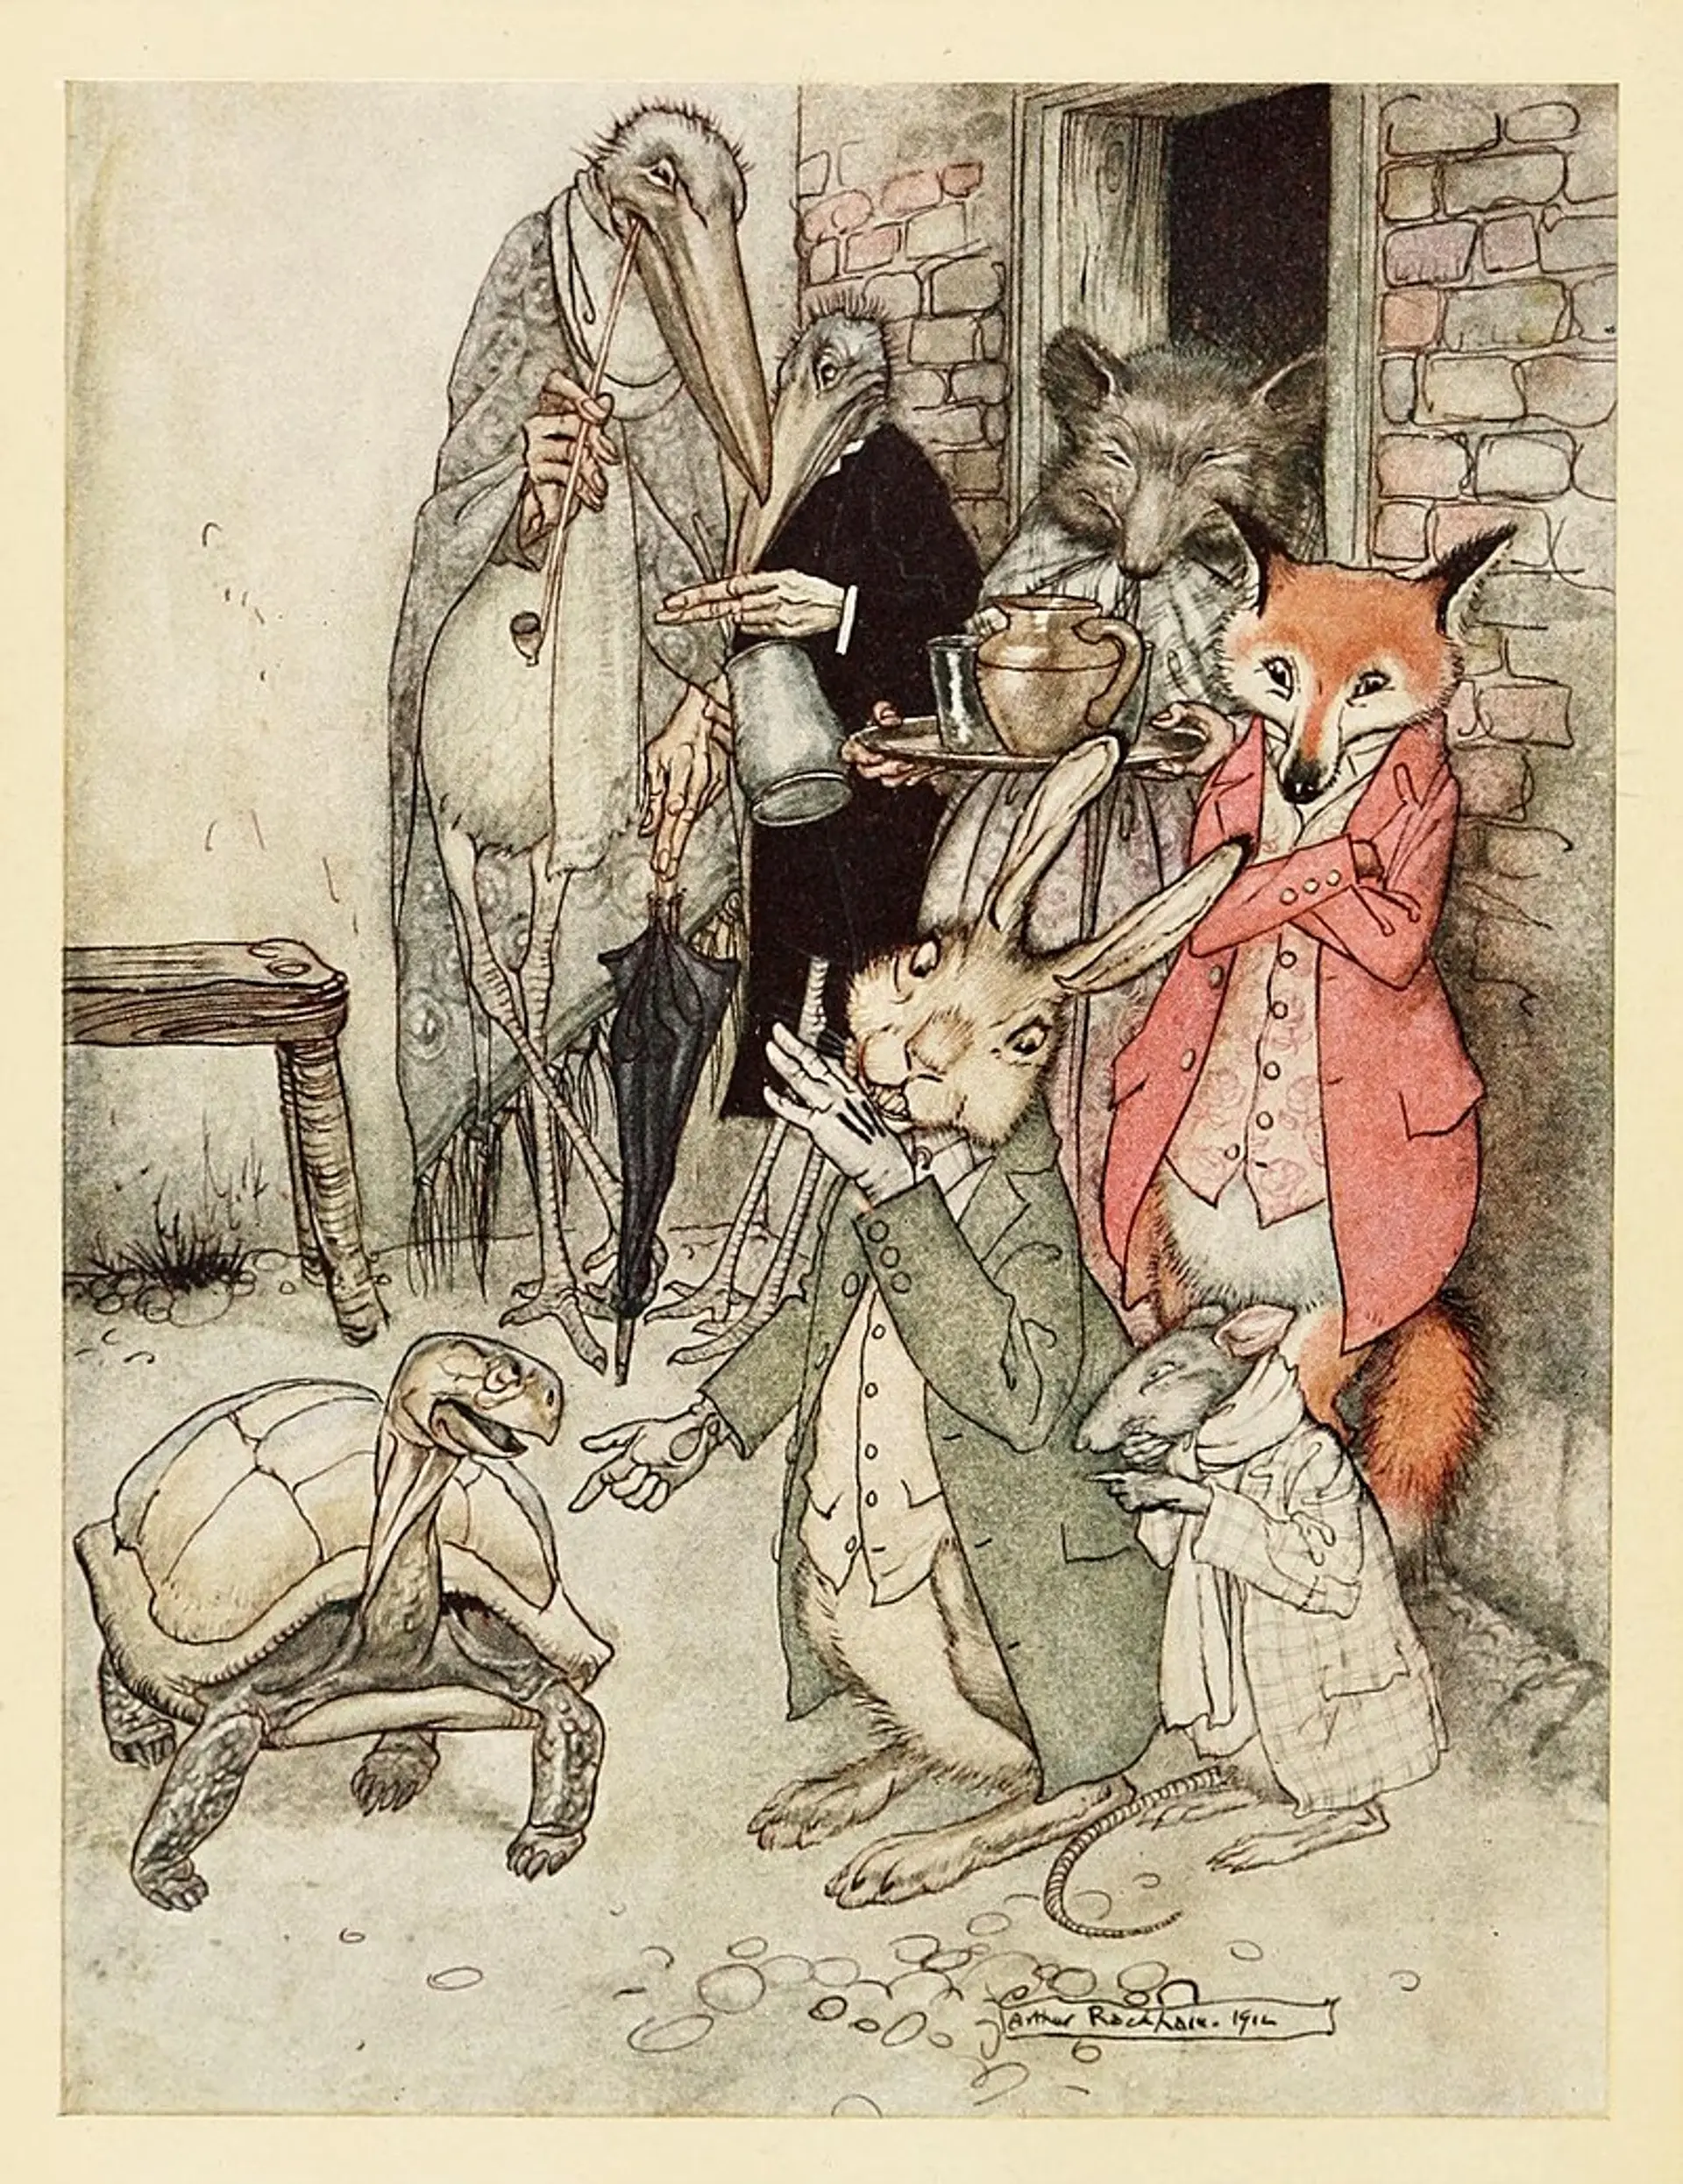 "The Tortoise and the Hare", from an edition of Aesop's Fables illustrated by Arthur Rackham, 1912